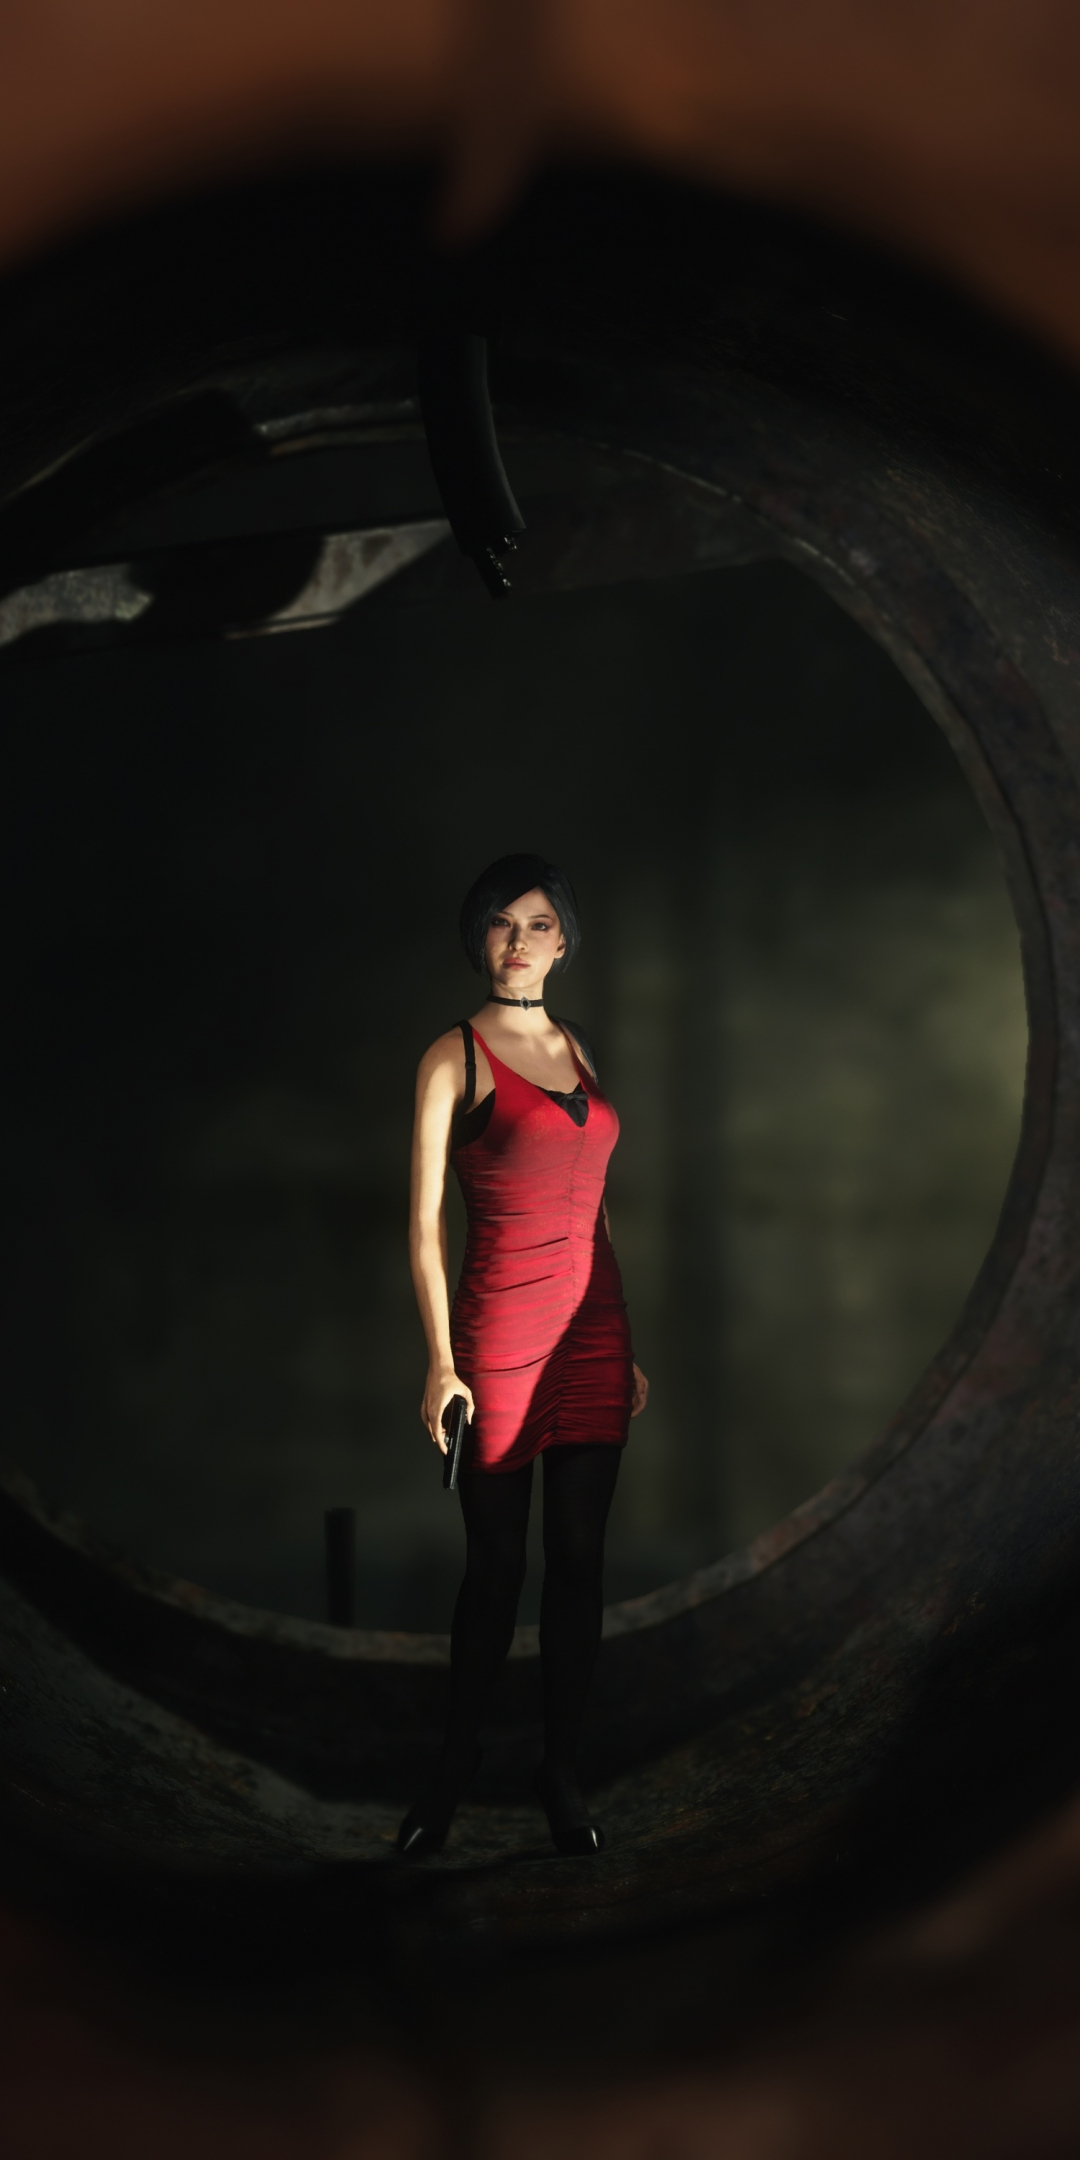 Resident Evil 2, video game, girl with the gun, the spy, 2019, 1080x2160 wallpaper